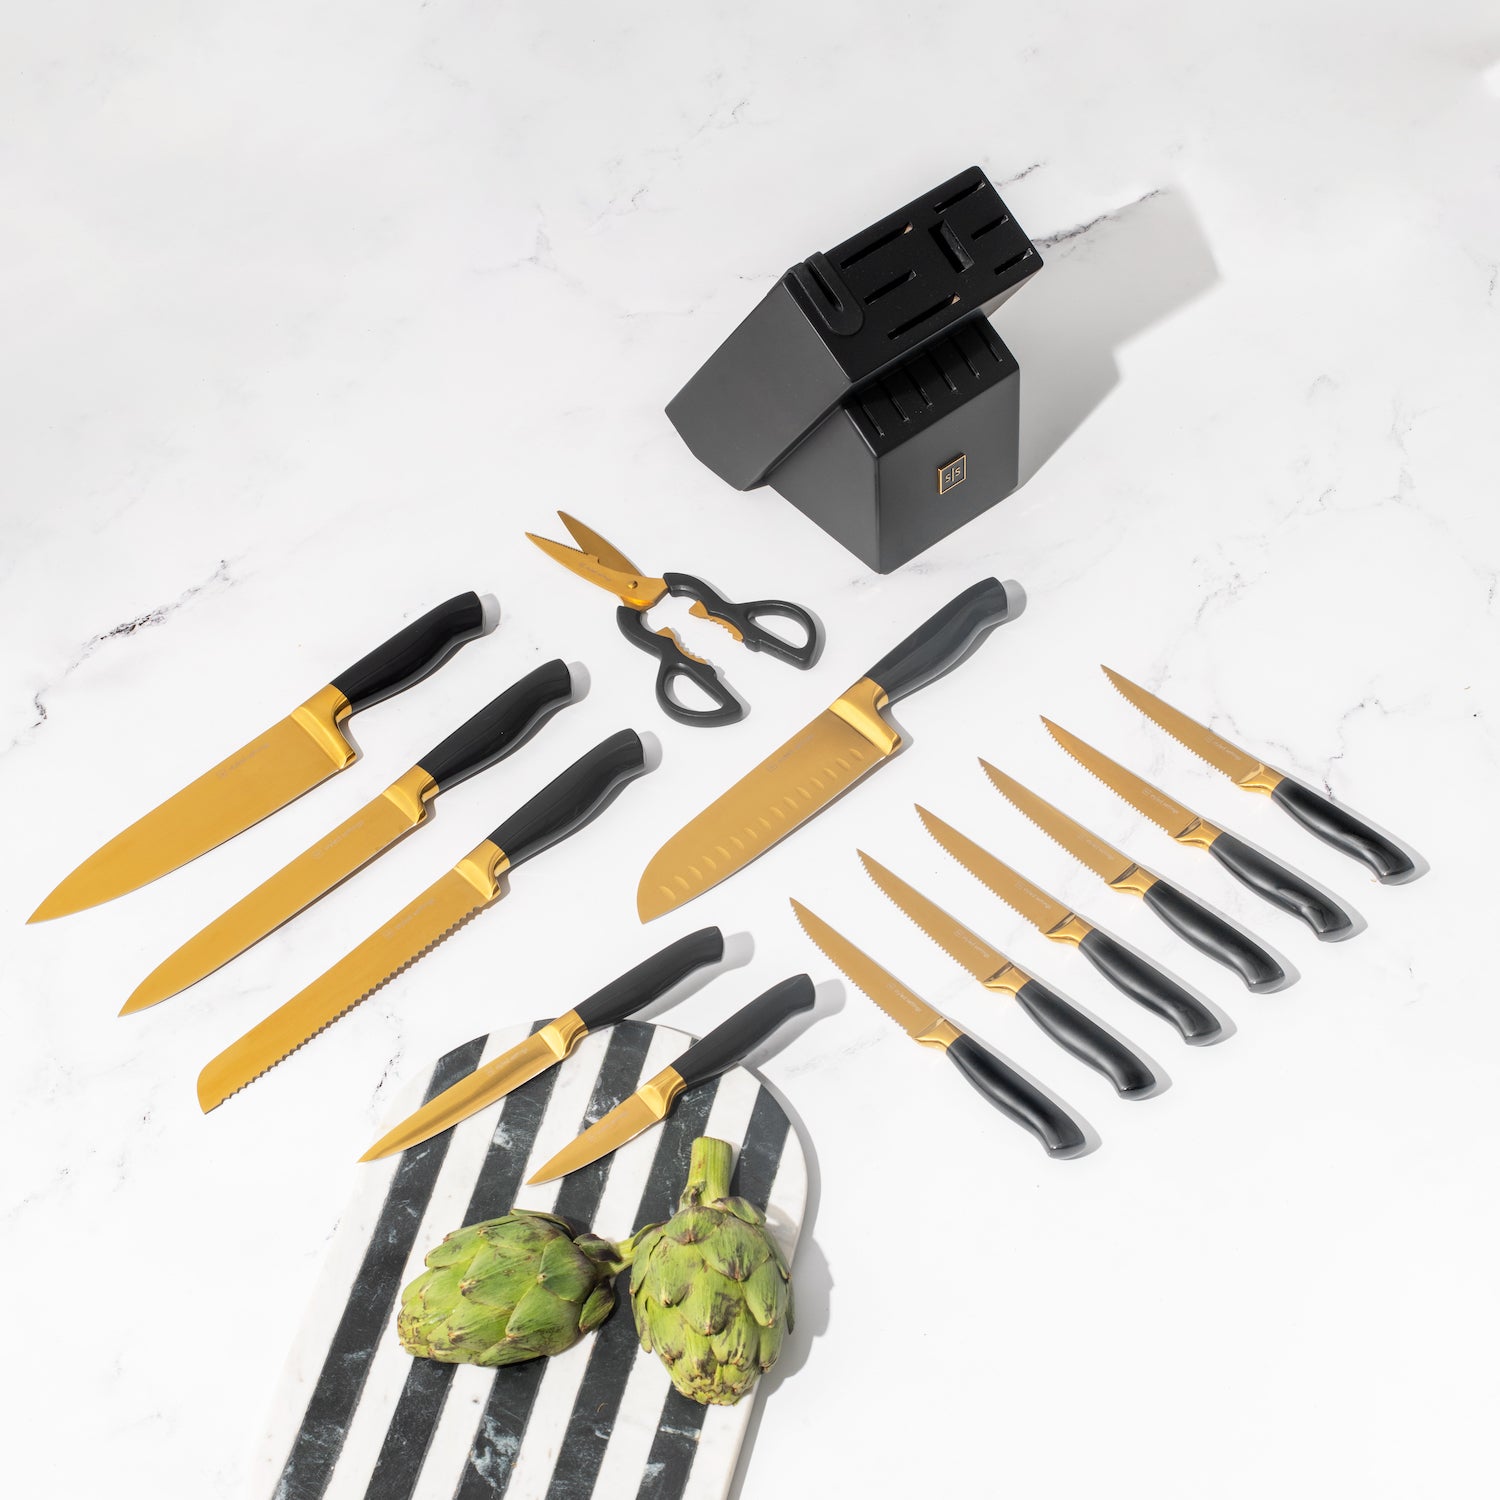 Black and Gold Knife Set with Black Self-Sharpening Block - Styled Settings